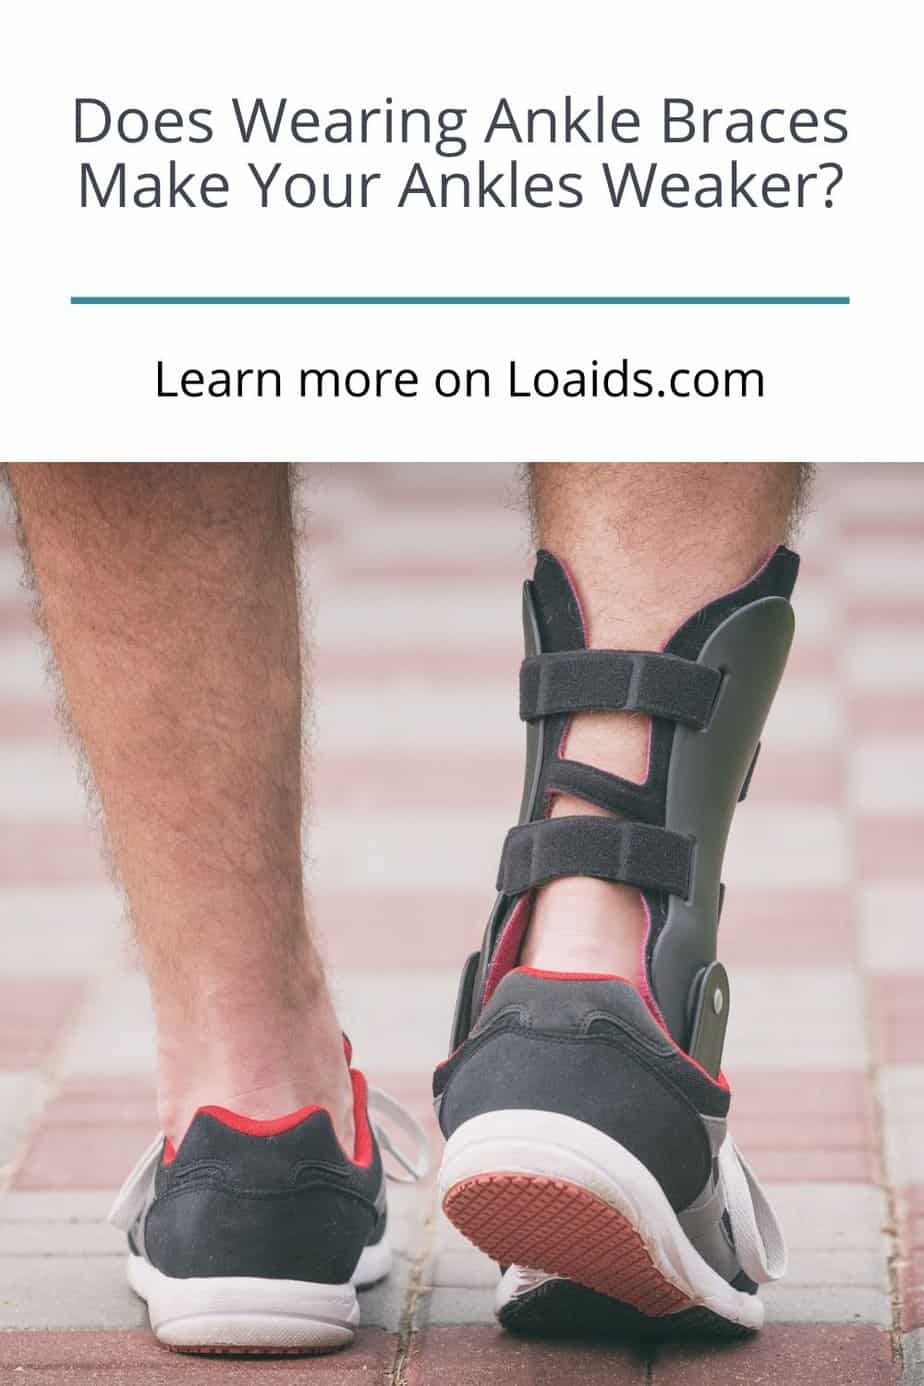 men wearing ankle braces but does wearing ankle braces make your ankles weaker